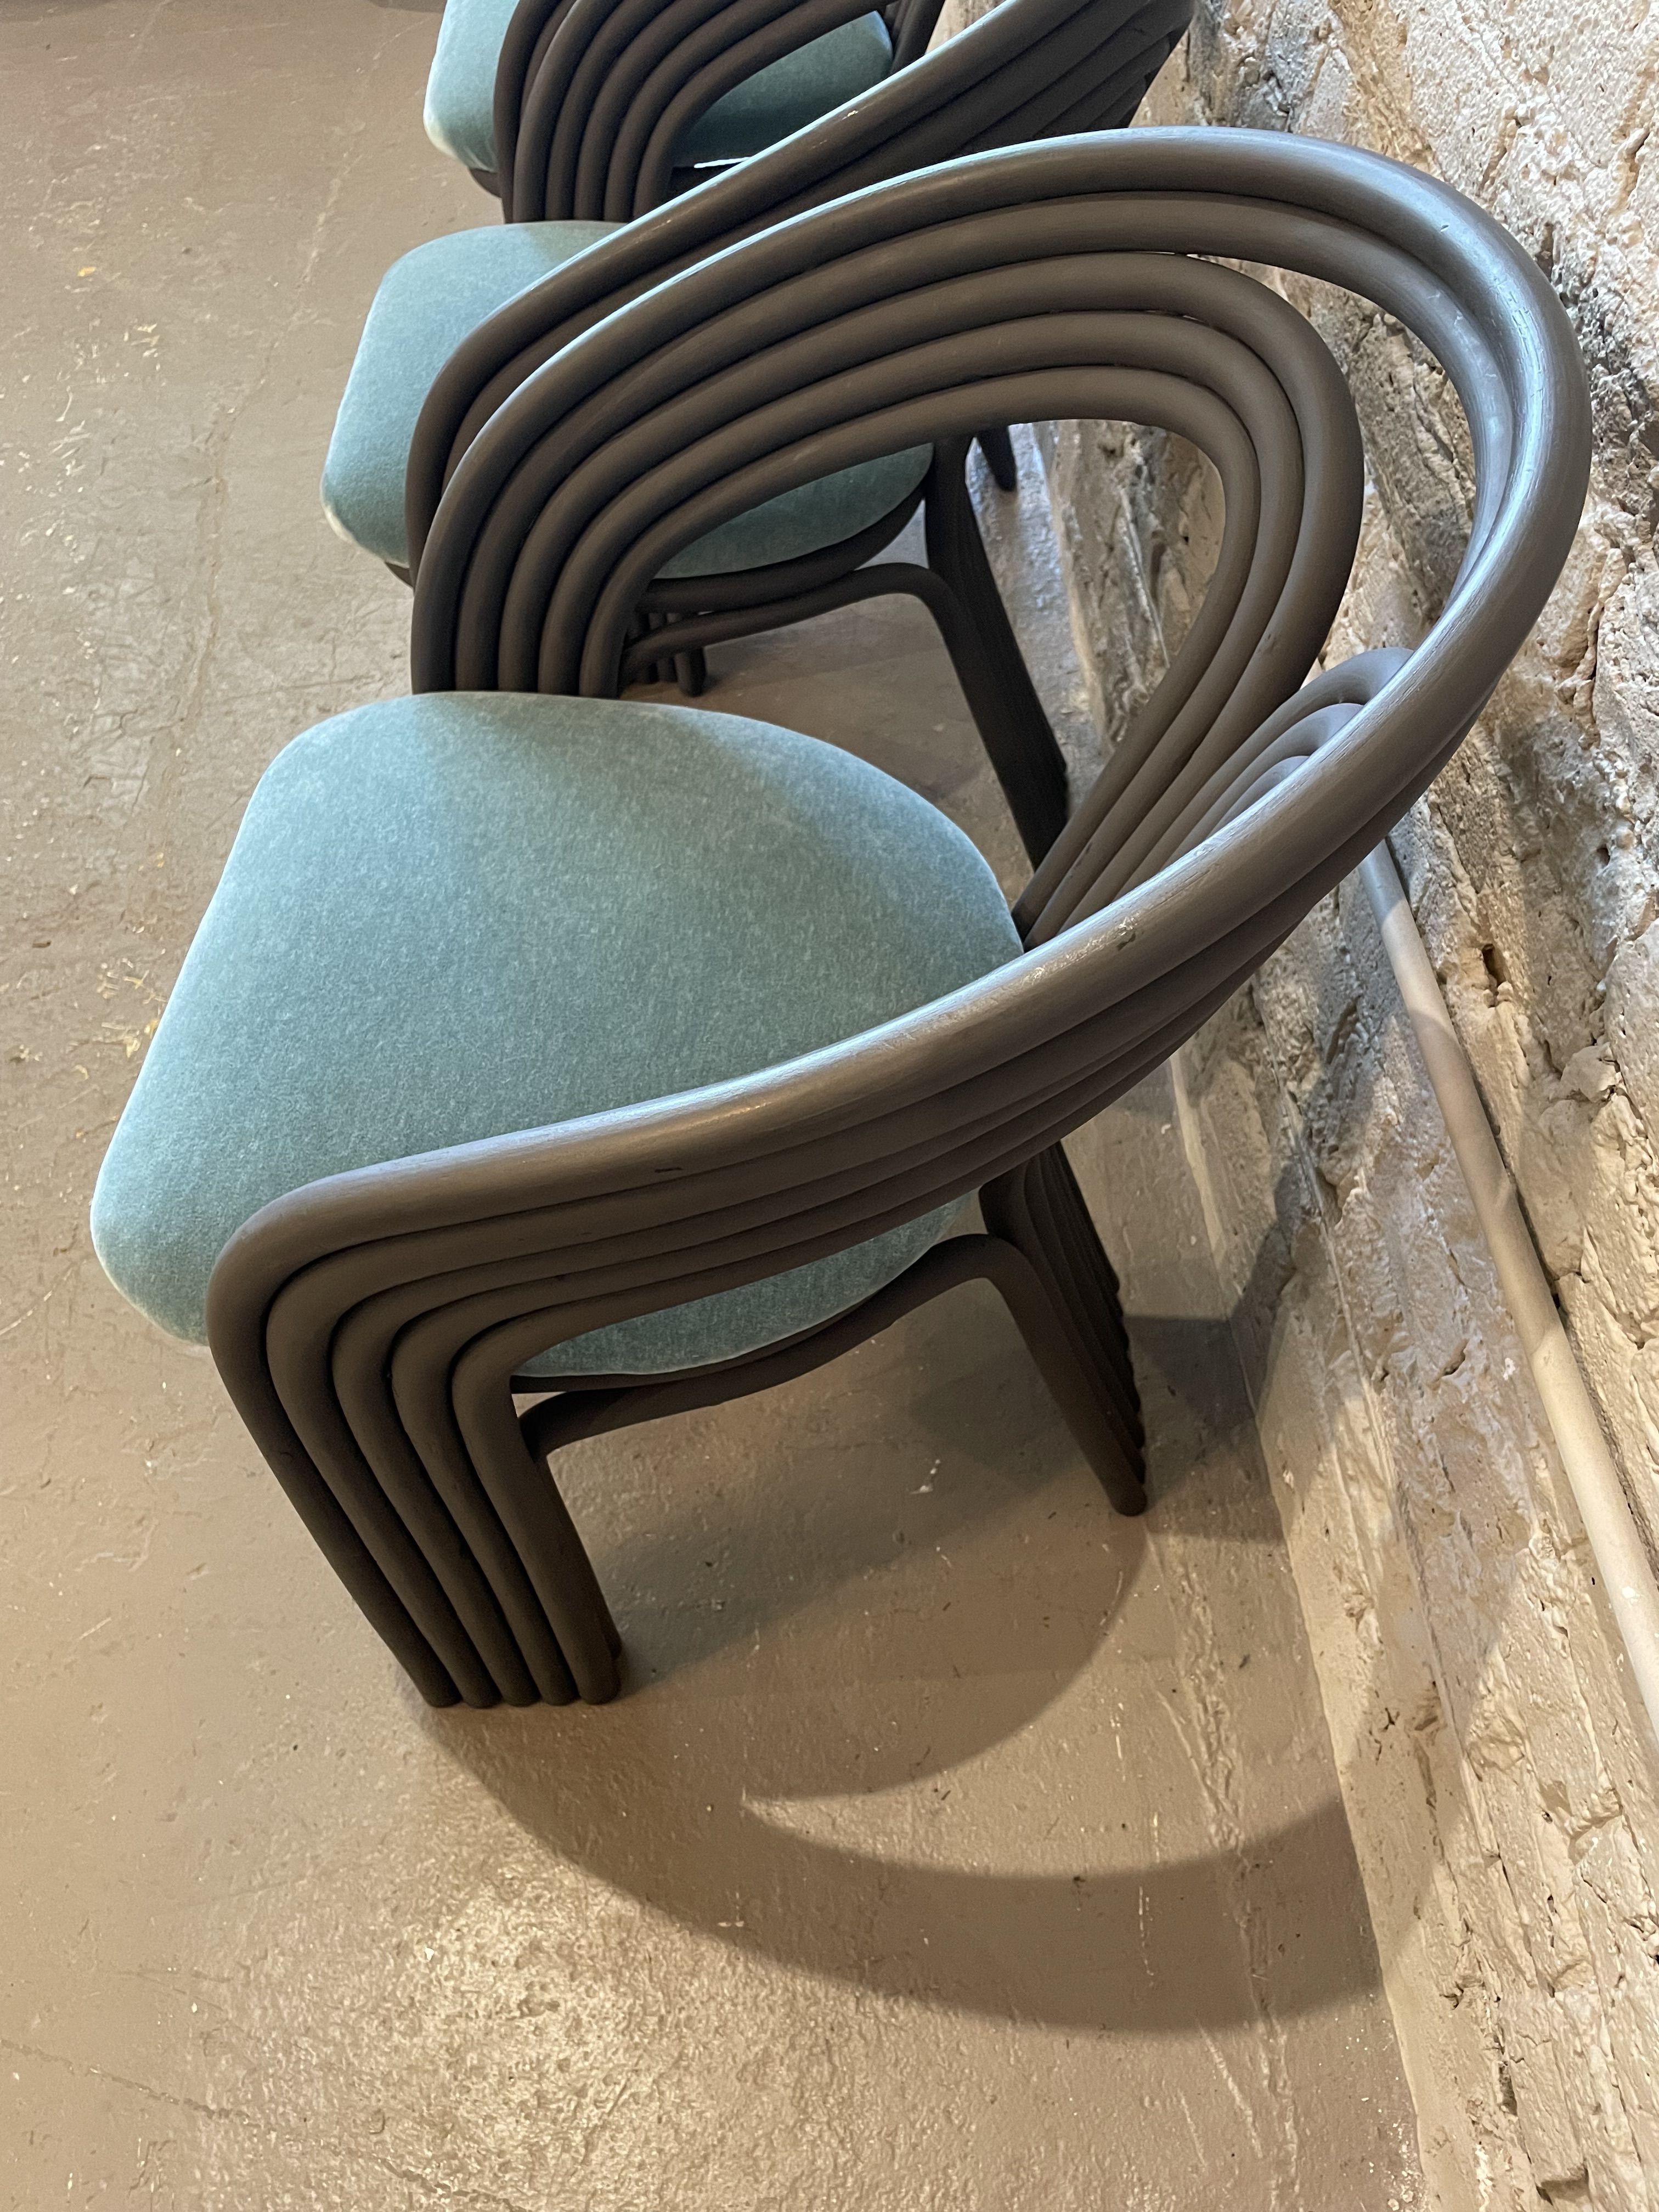 Beautiful curves! Please note - a designer borrowed these for a show and painted over the already black bamboo but the paint is peeling. I suggest sanding them and repainting/refinishing. The fabric seats are in great condition and easily removable.